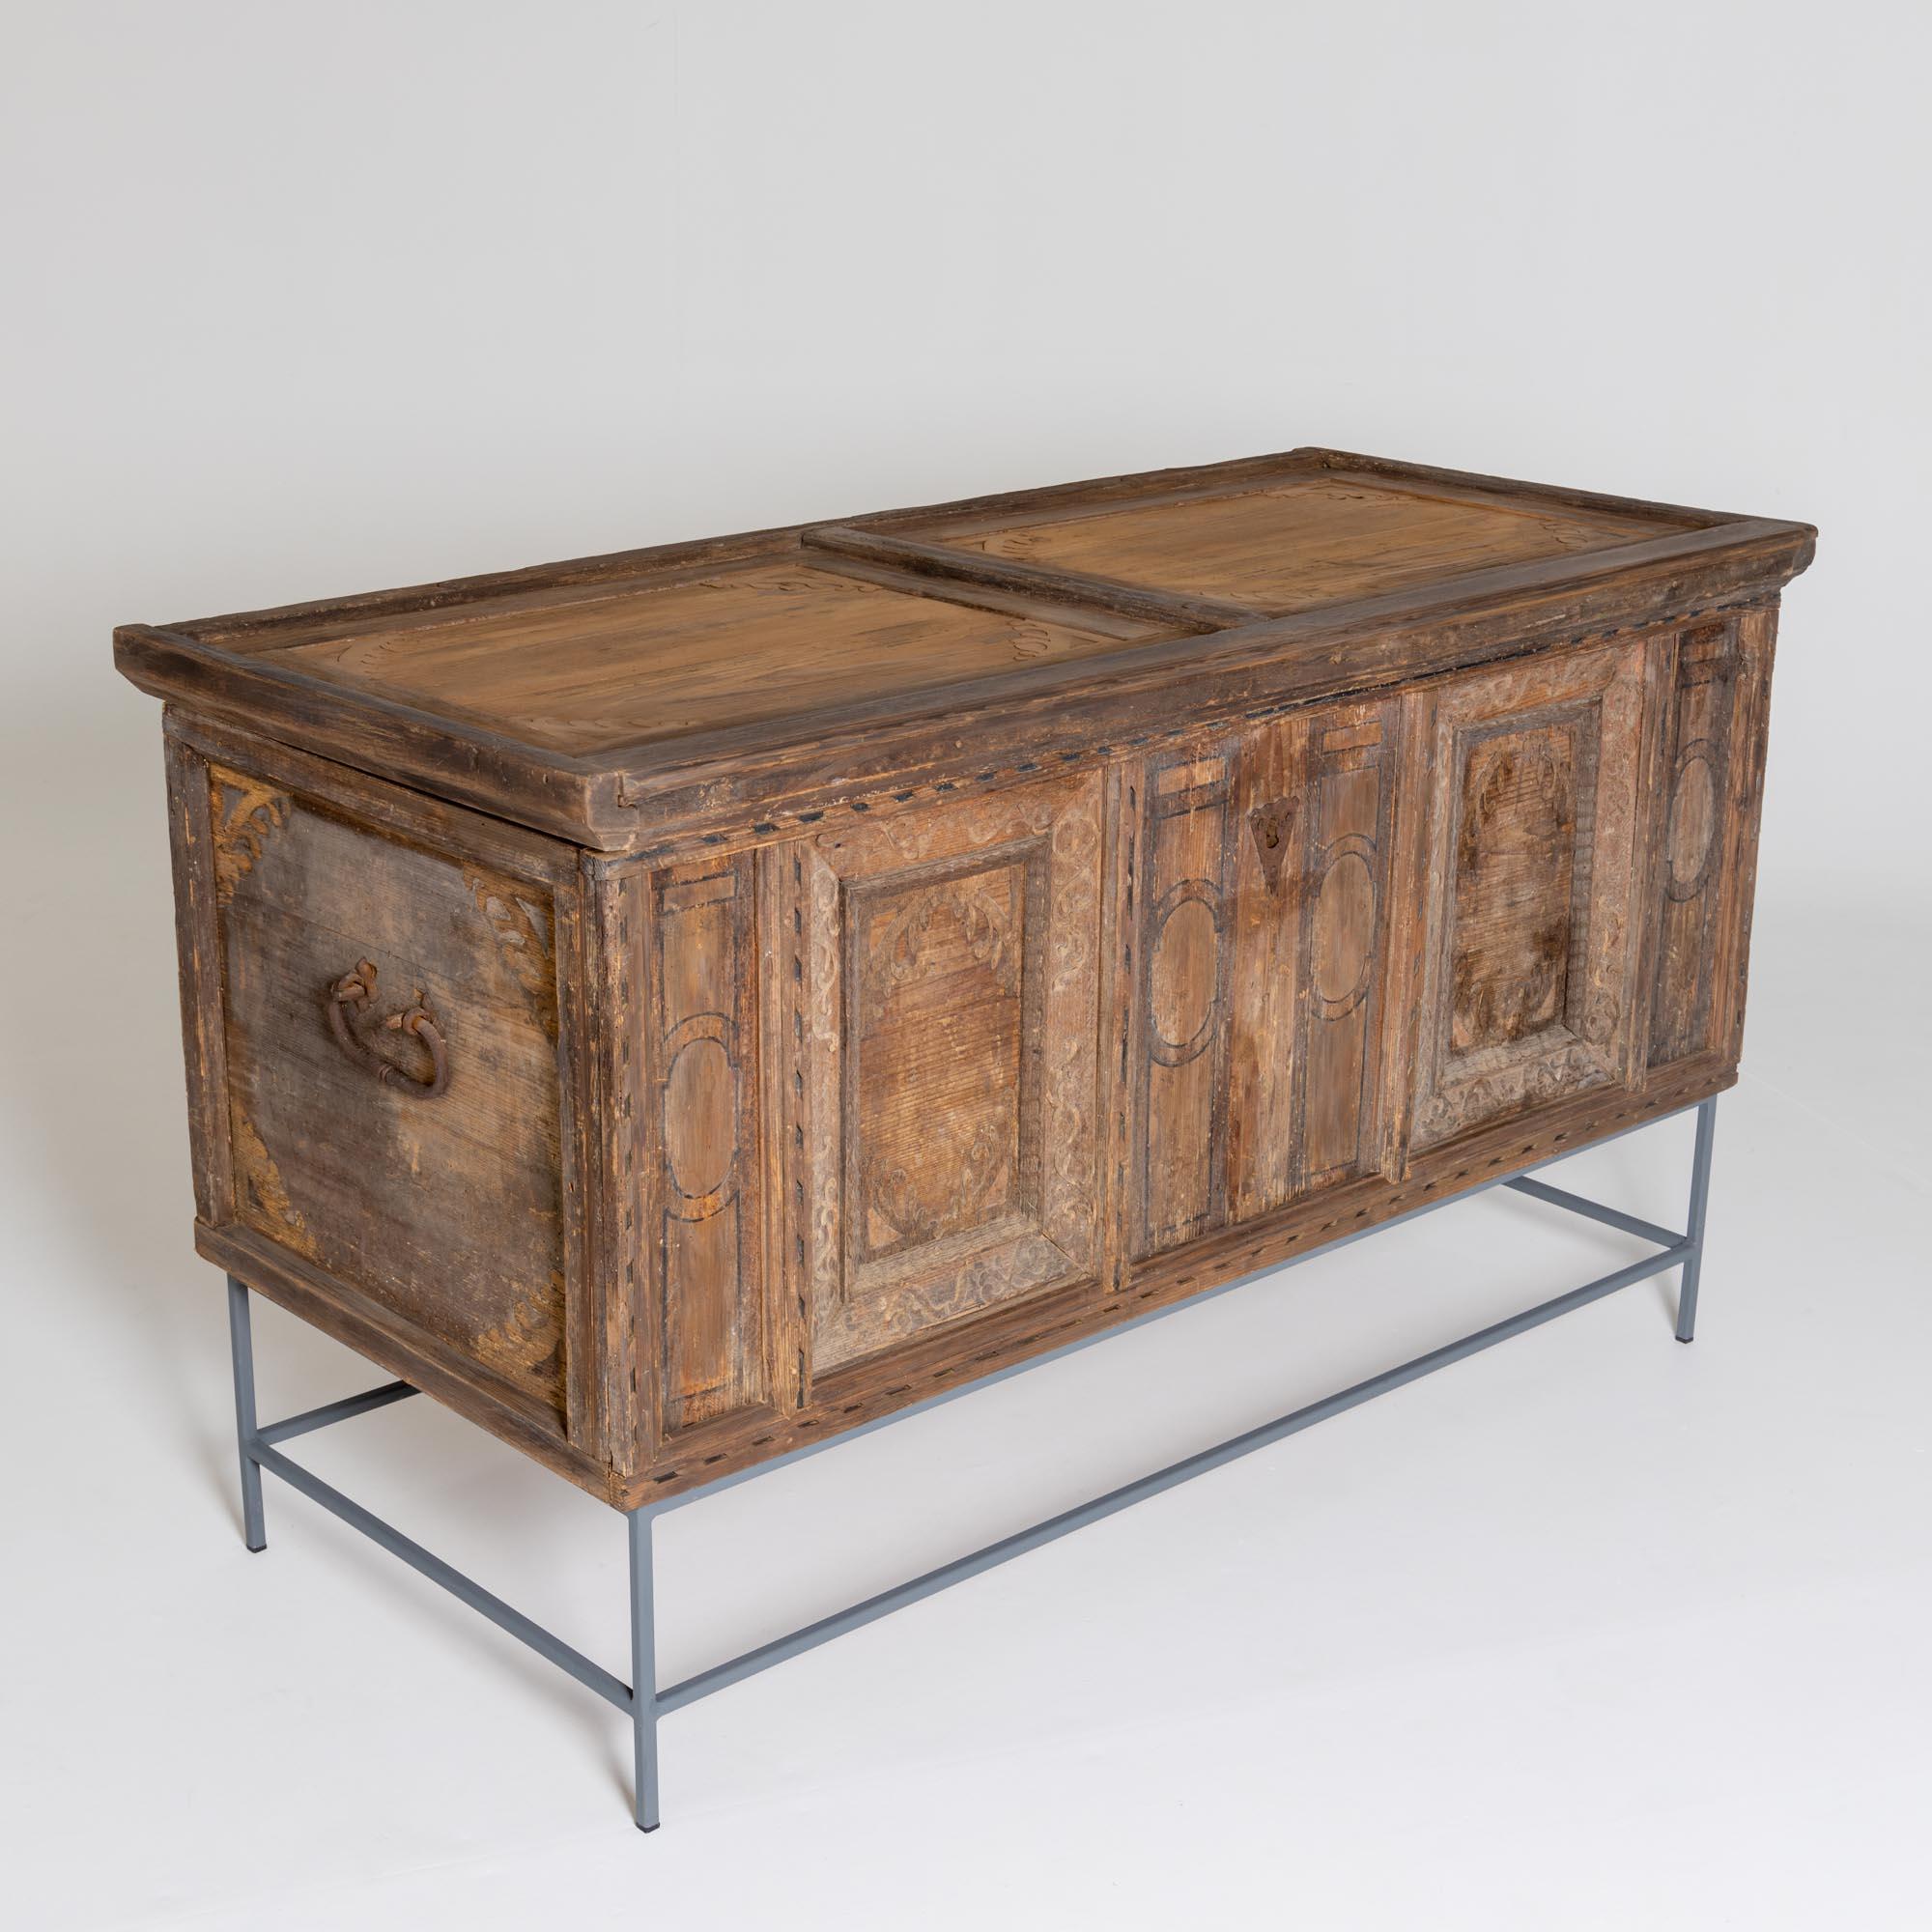 Flat-lidded chest made of softwood with side handles and iron fittings. The chest stands on a modern metal frame (height: 31 cm). The chest is partly painted and partly decorated with applied vine decorations.